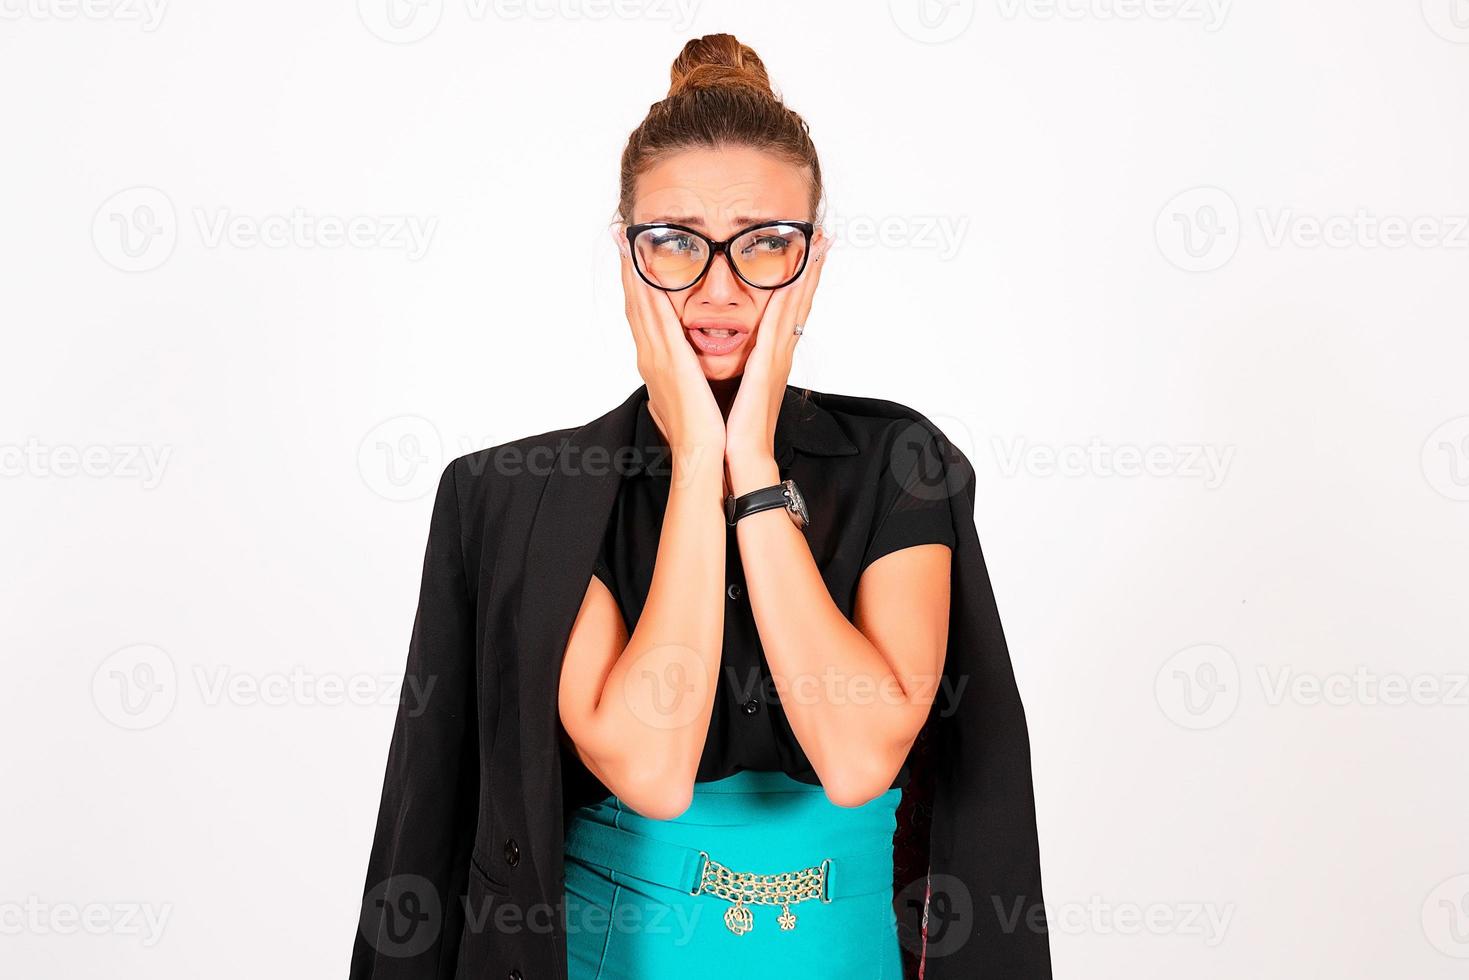 White background, girl office worker, business woman, shows emotions photo